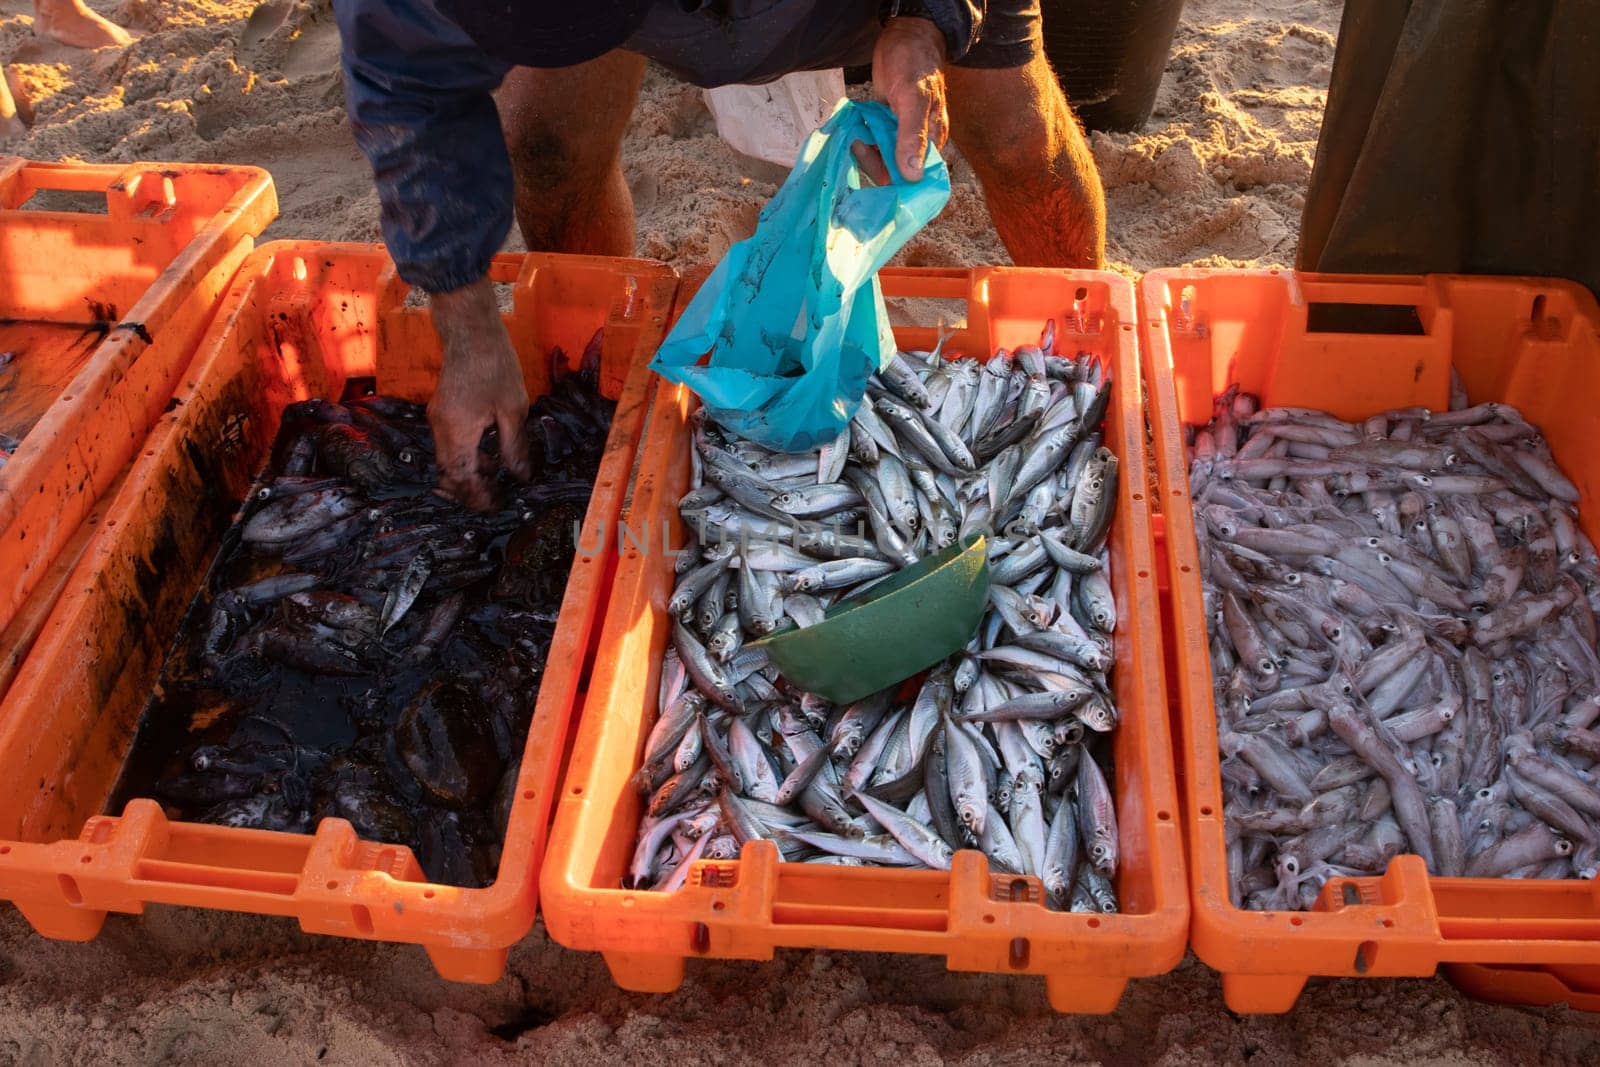 Freshly caught fish in orange containers on the beach. Mid shot